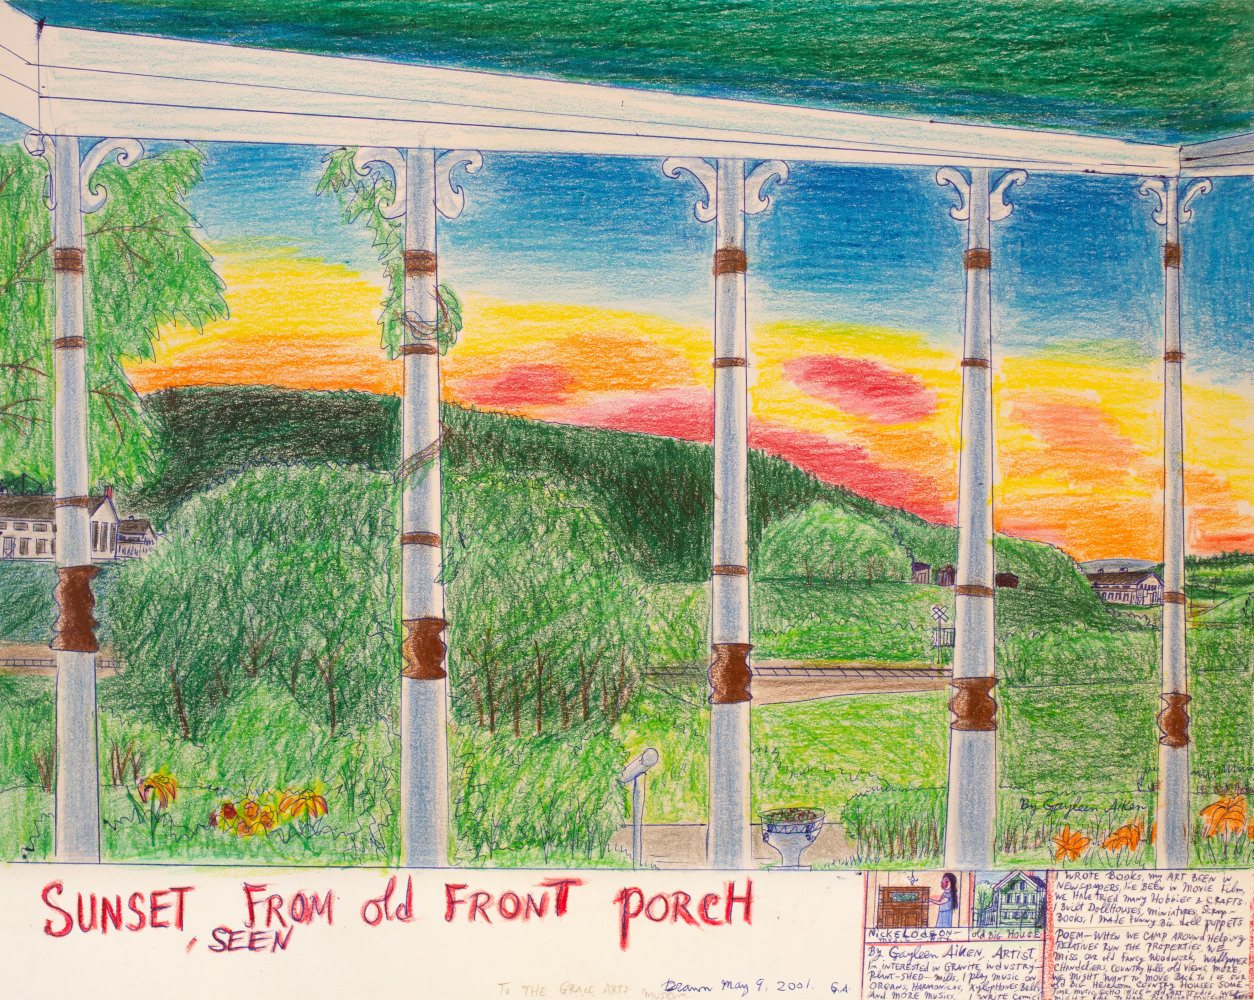 Sunset, Seen From Old Front Porch, 2001
Colored pencil, ballpoint pen, and crayon on paper
11 x 14 inches